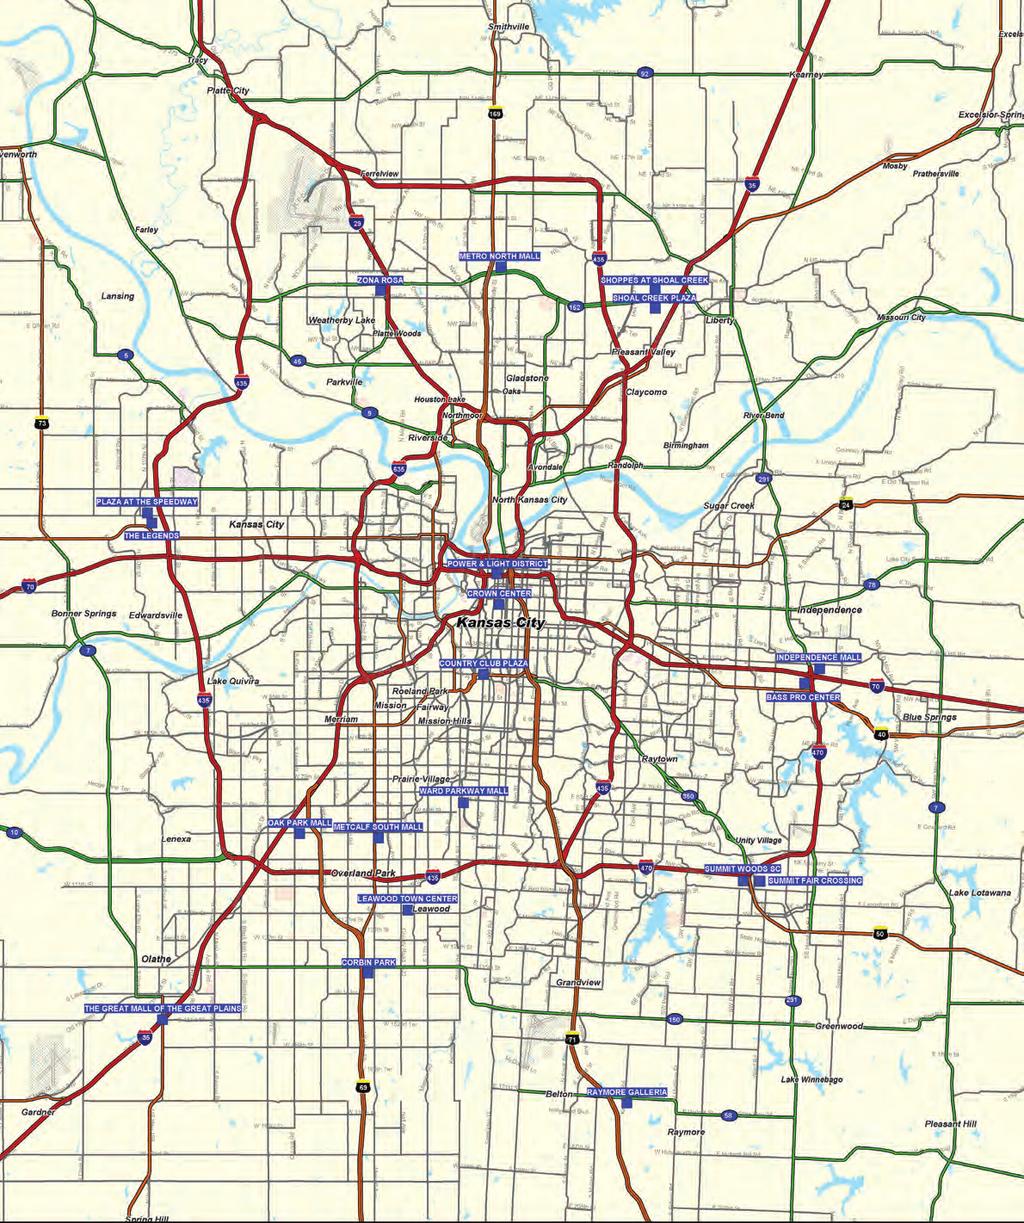 Greater Kansas City Metropolitan Area Locator Map Platte City Exselsior Springs Leavenworth KCI Airport METRO NORTH Lansing ZONA ROSA SHOPPES AT PLAZA AT SITE Pleasant Valley Liberty Parkville